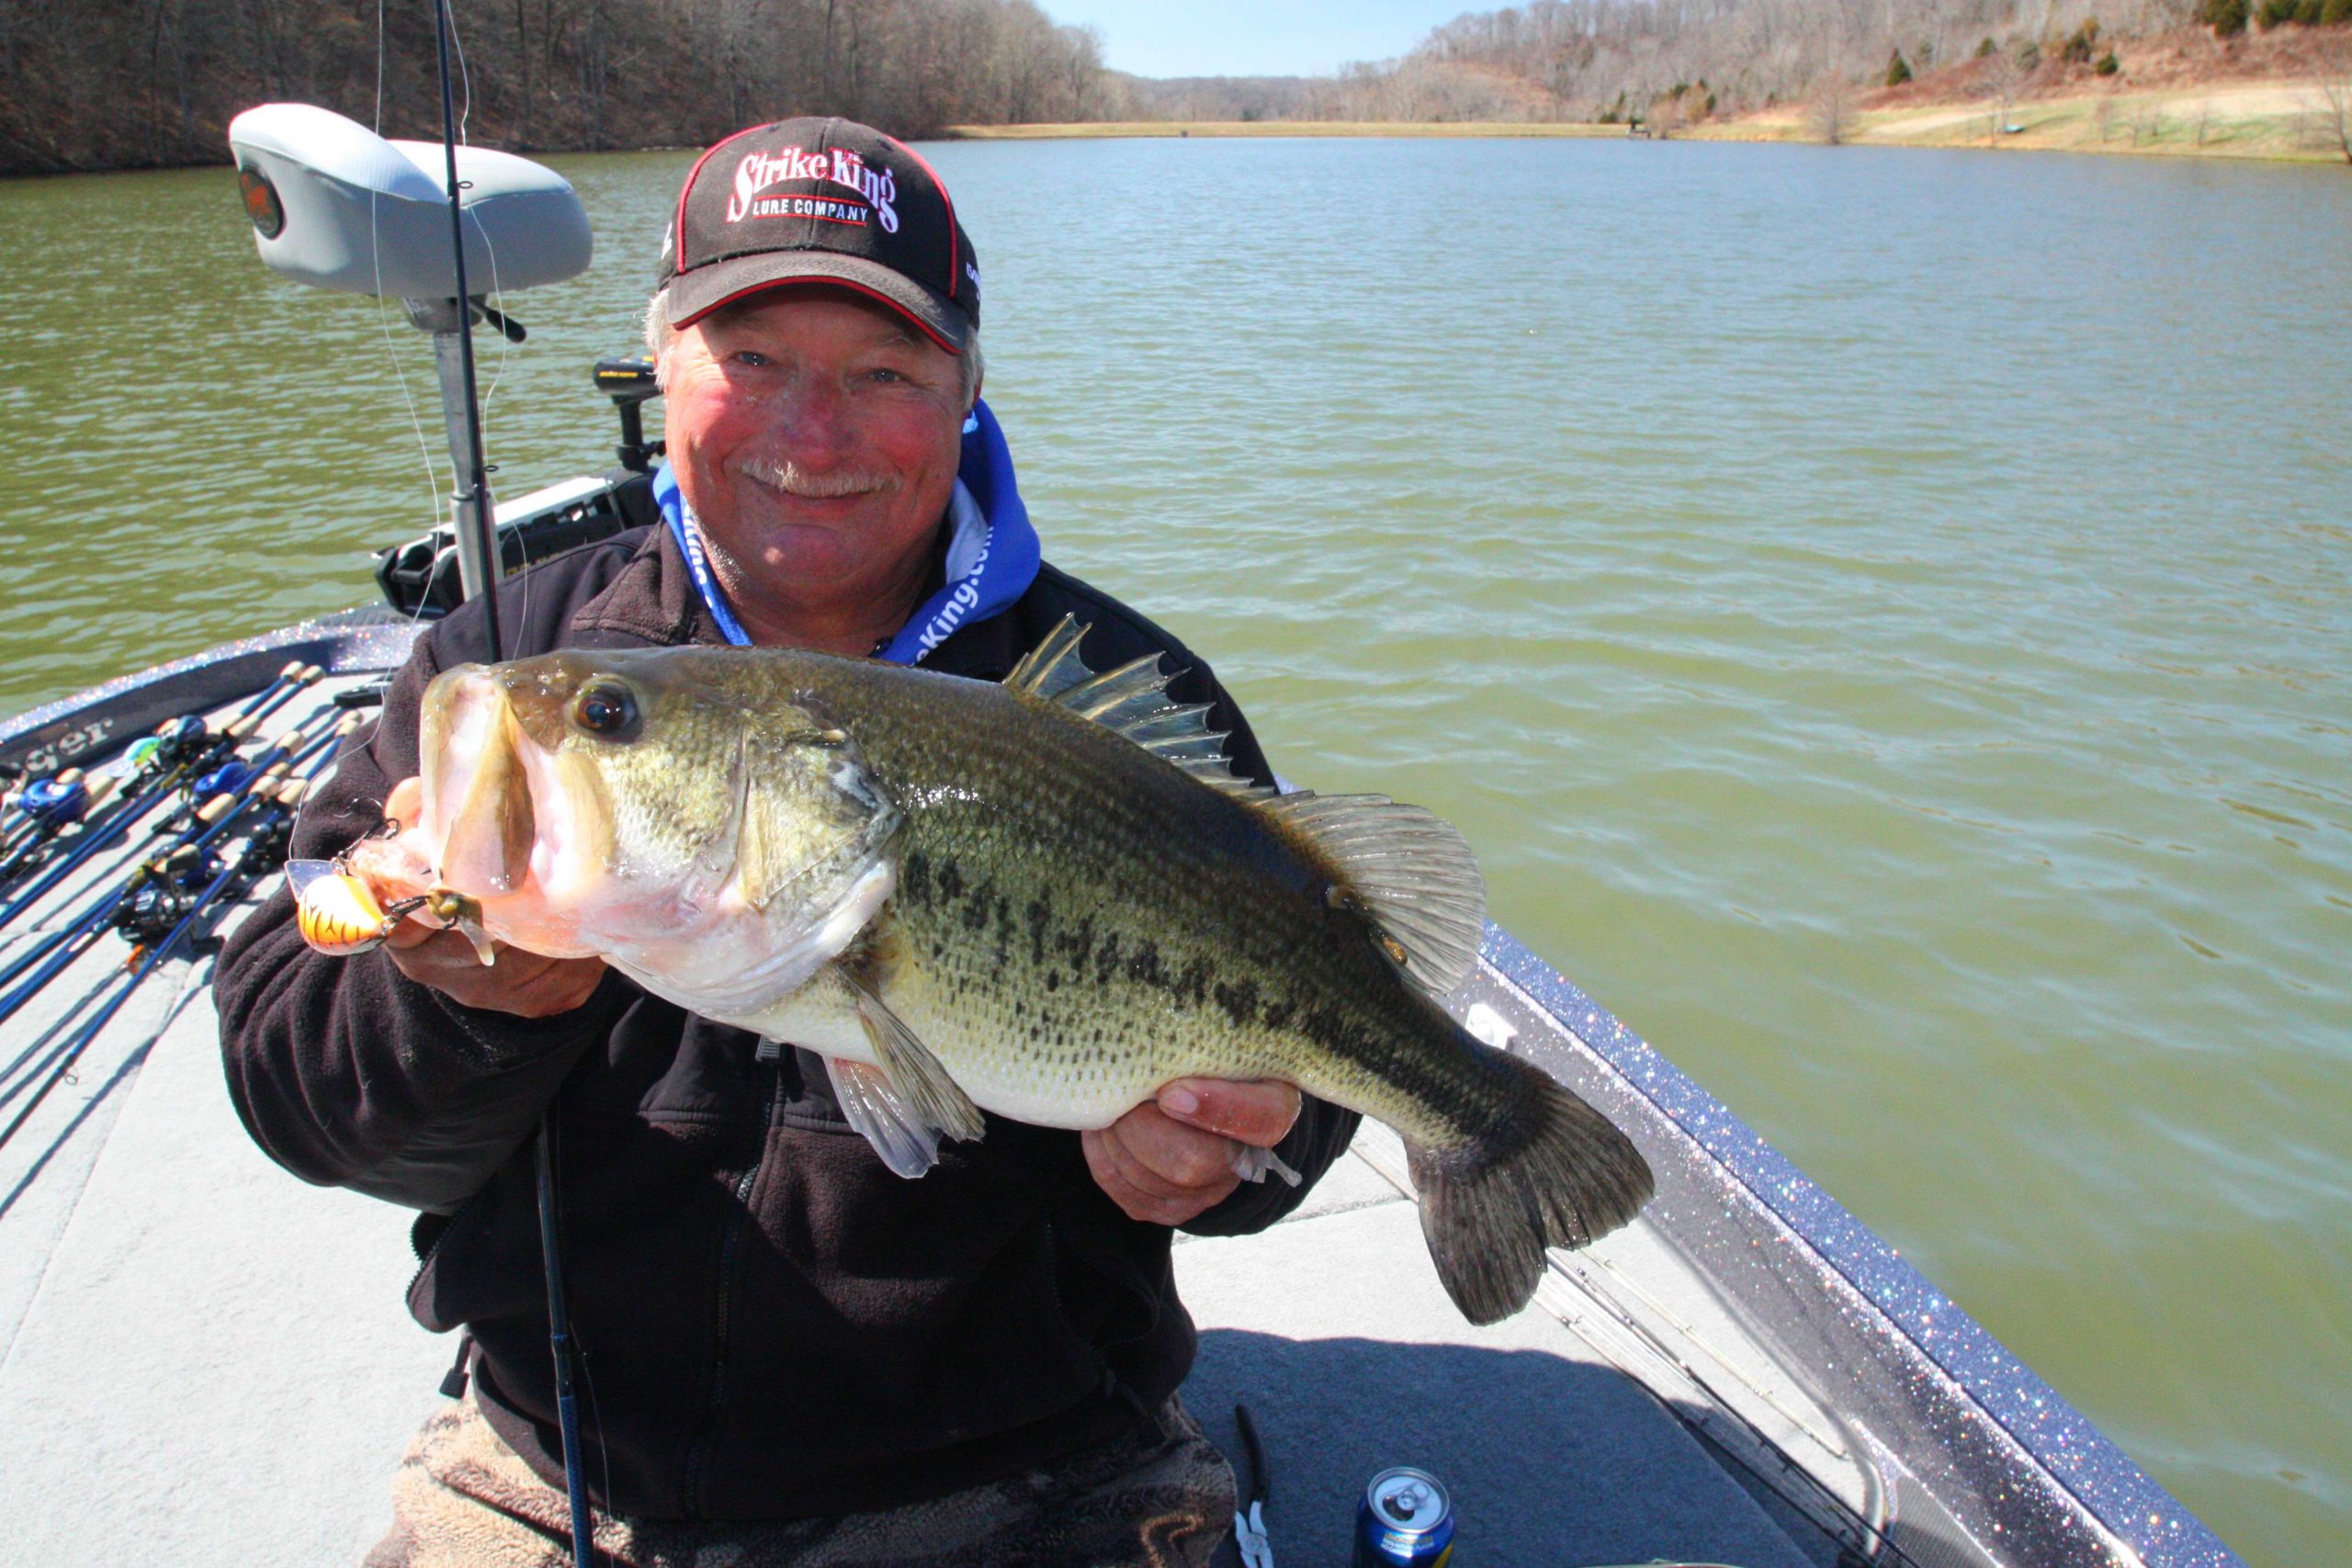 12:35 p.m. What a hawg! Brauerâs sixth keeper of the day, an 8-9 largemouth, ate his square bill crankbait on an offshore rockpile.